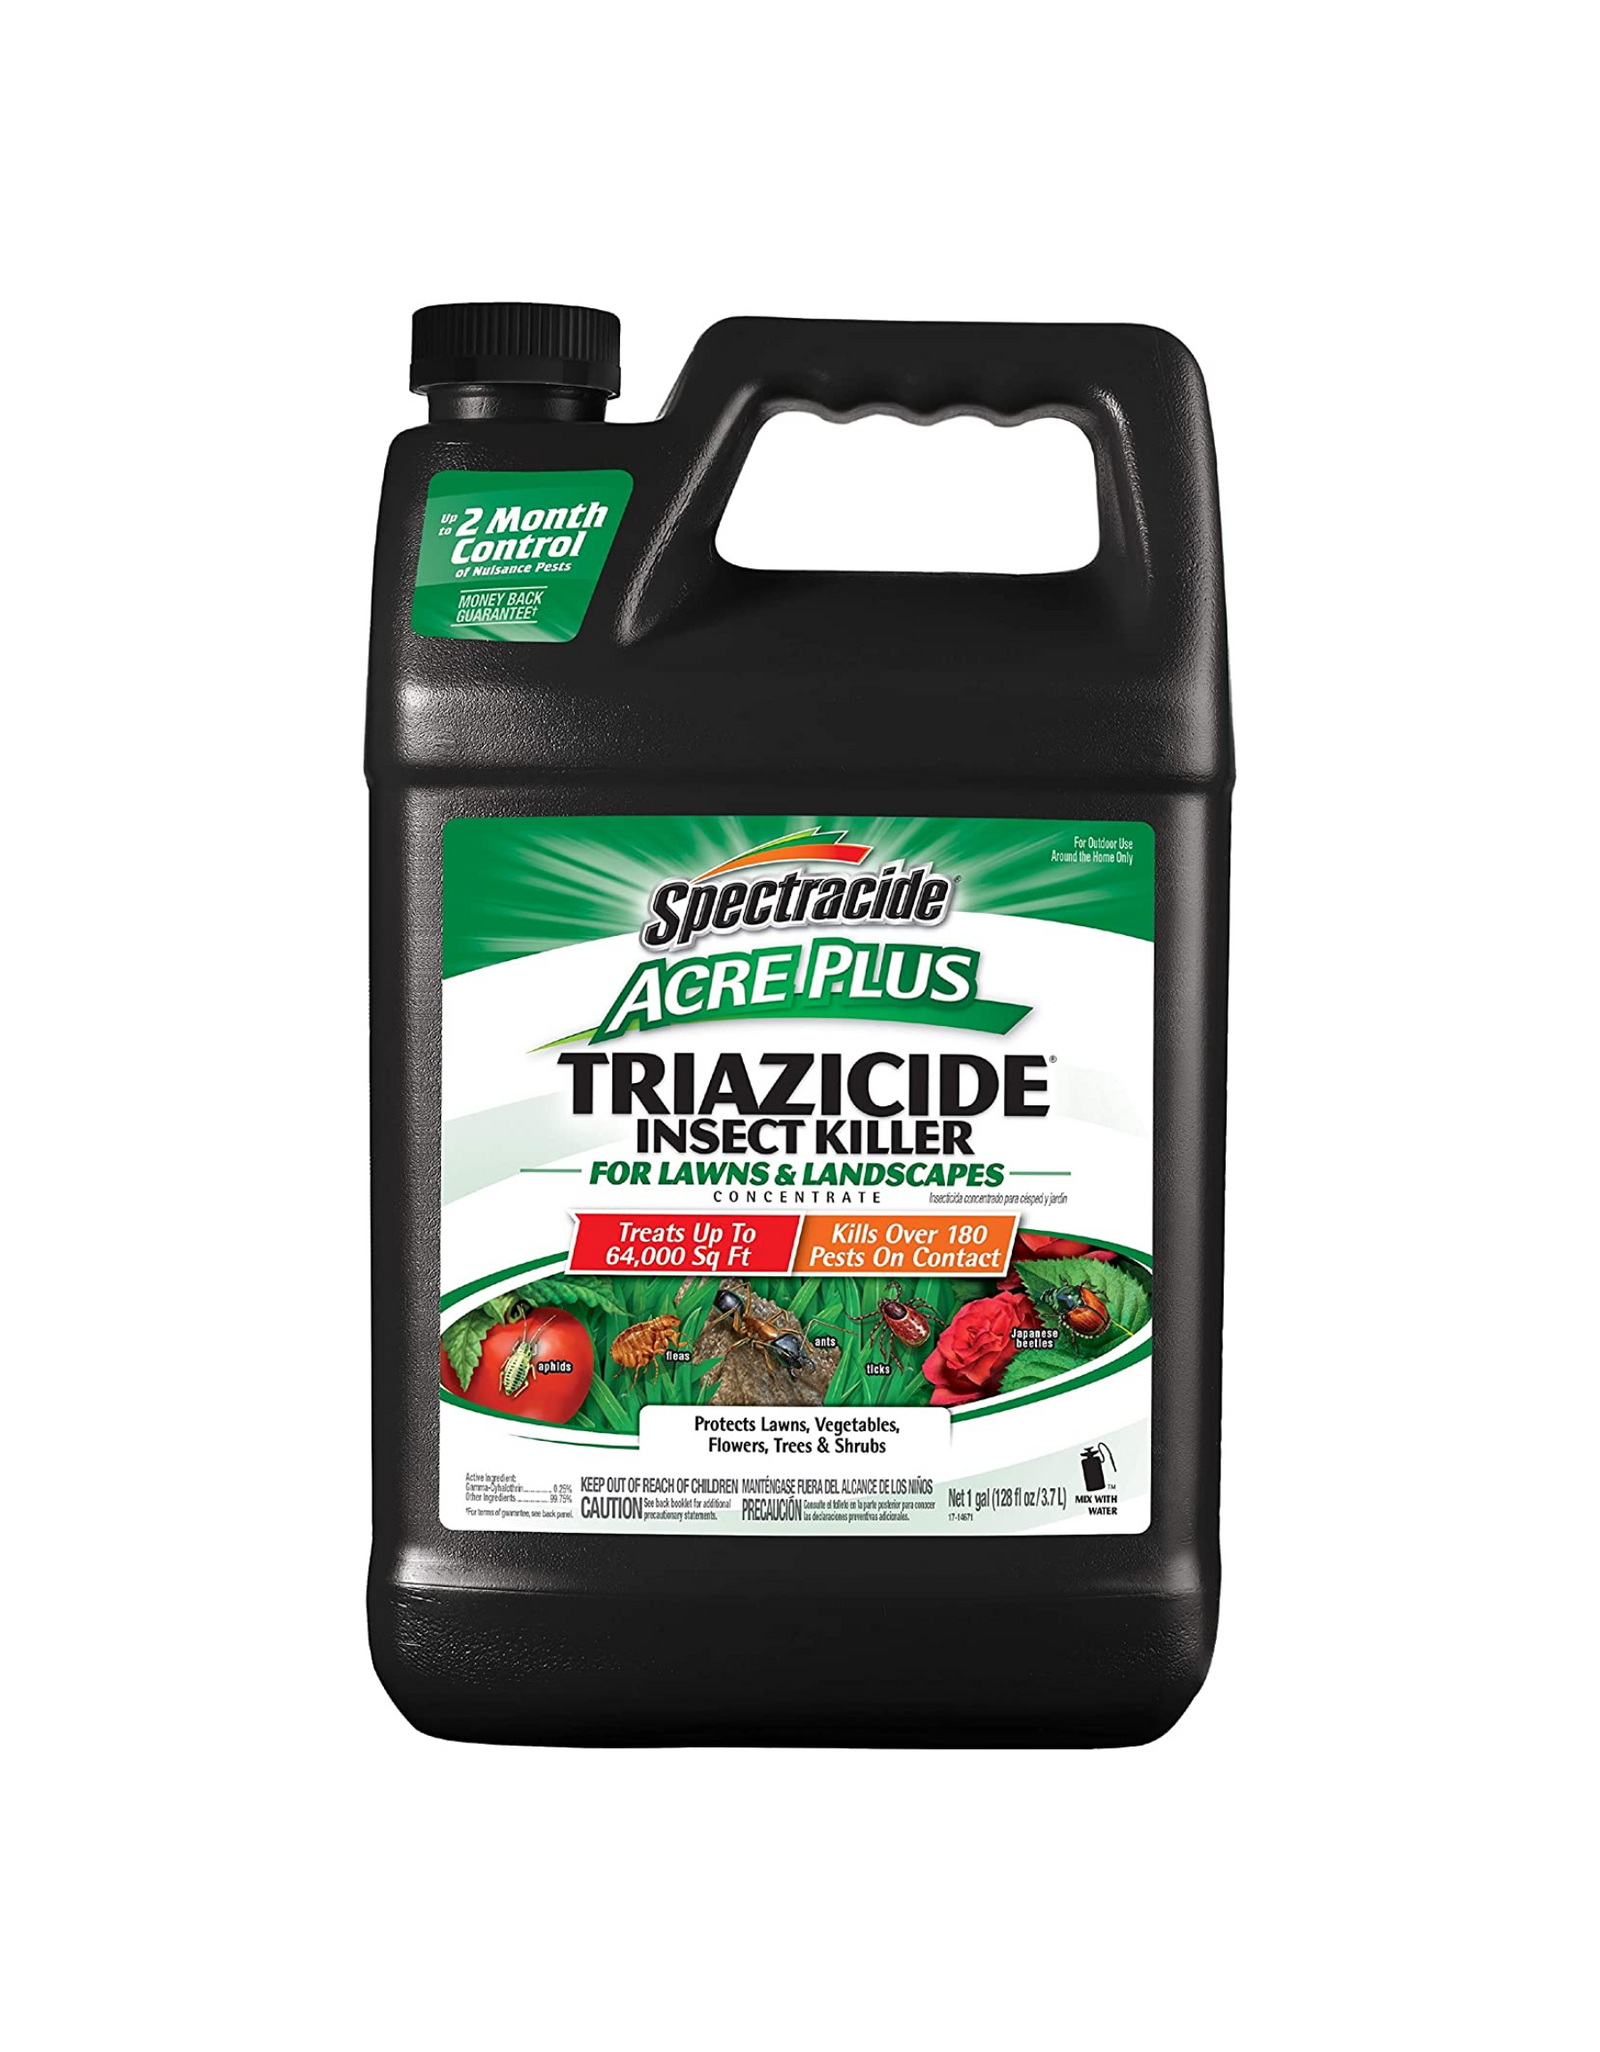 Spectracide Acre Plus Triazicide Insect Killer,  For Lawns and Landscapes, Kills Over 180 Pests On Contact, Concentrate, 1 Gal